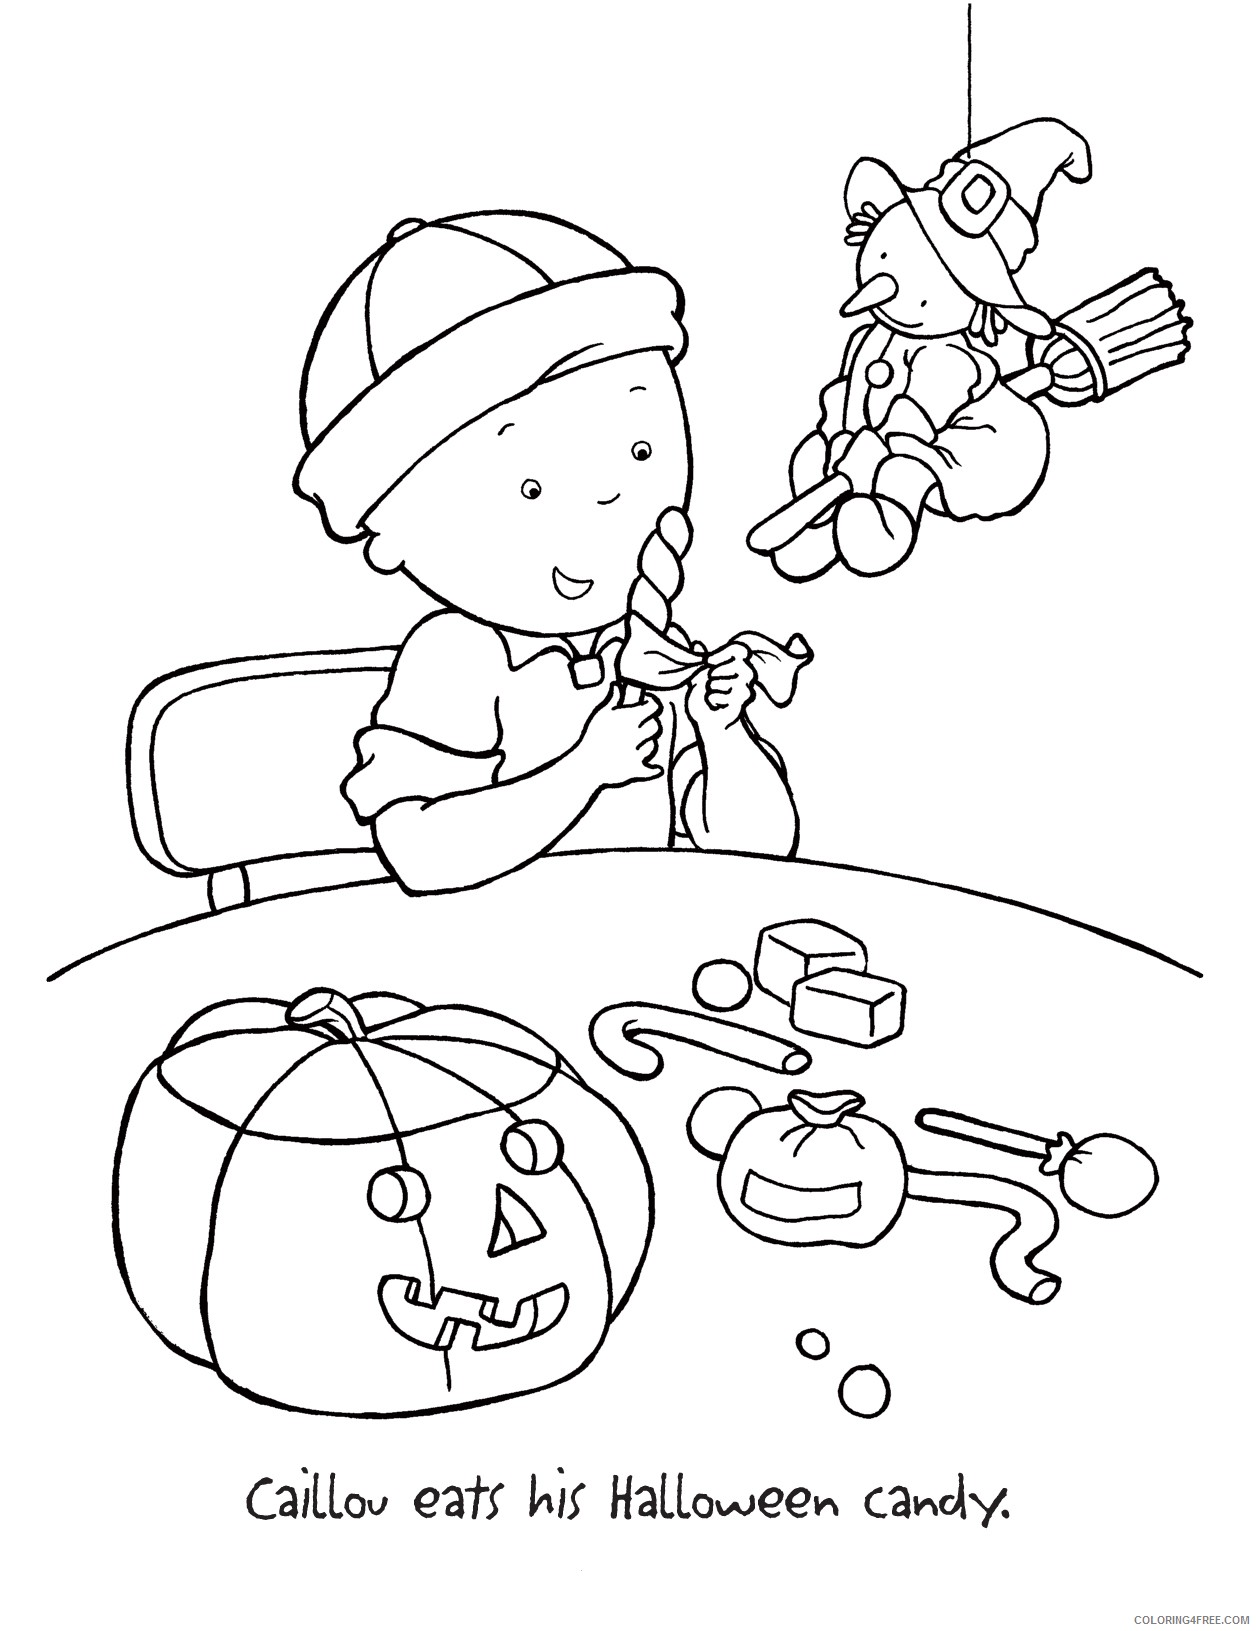 caillou coloring pages halloween Coloring4free